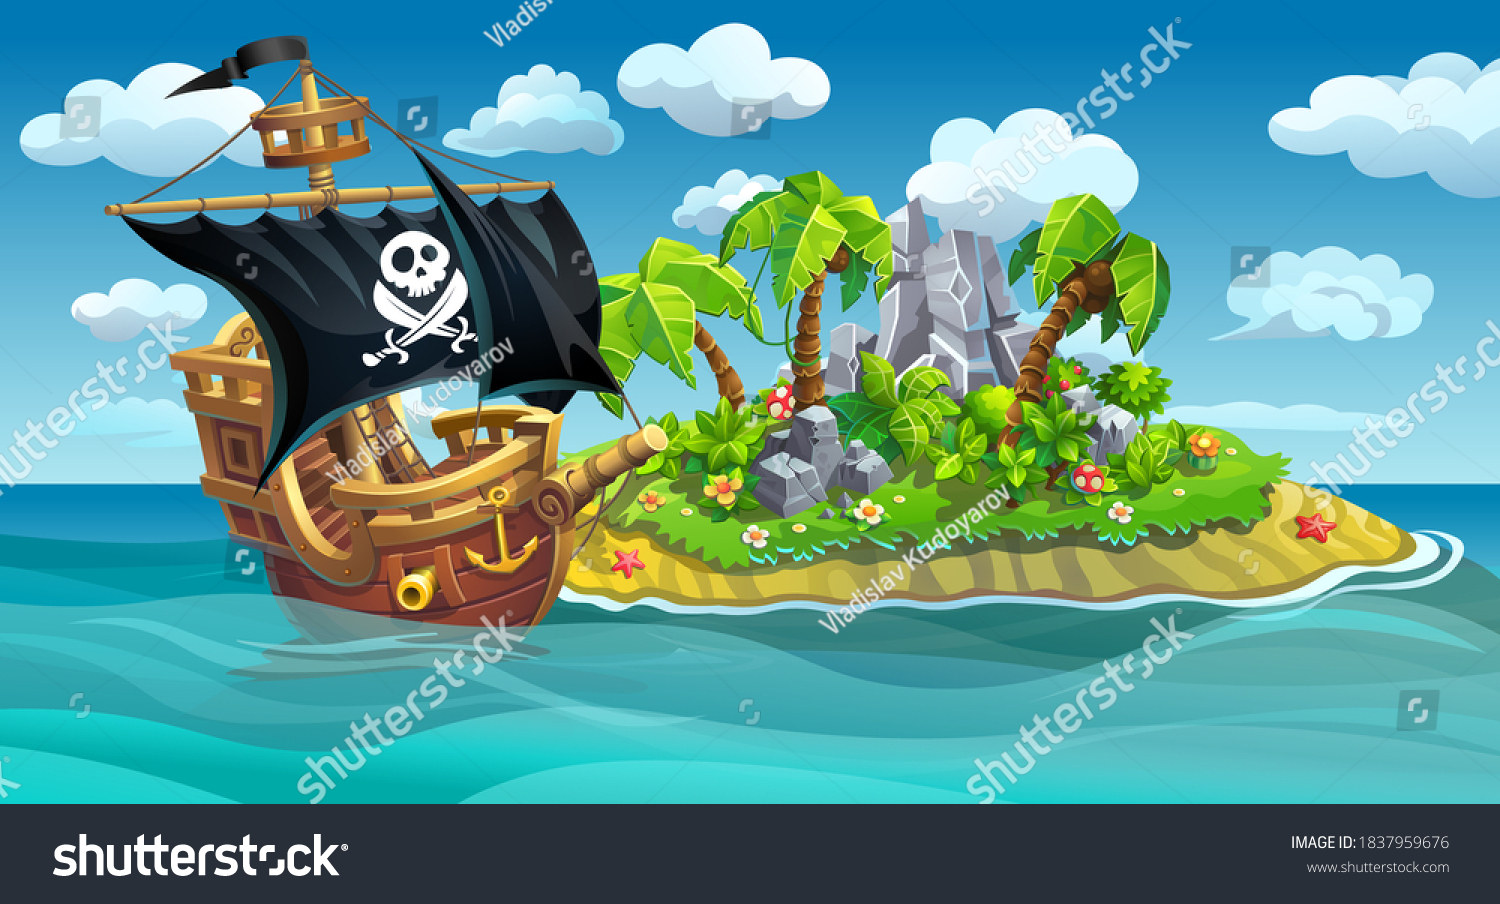 SVG of A wooden pirate ship with sails stands near a tropical island with palm trees. svg